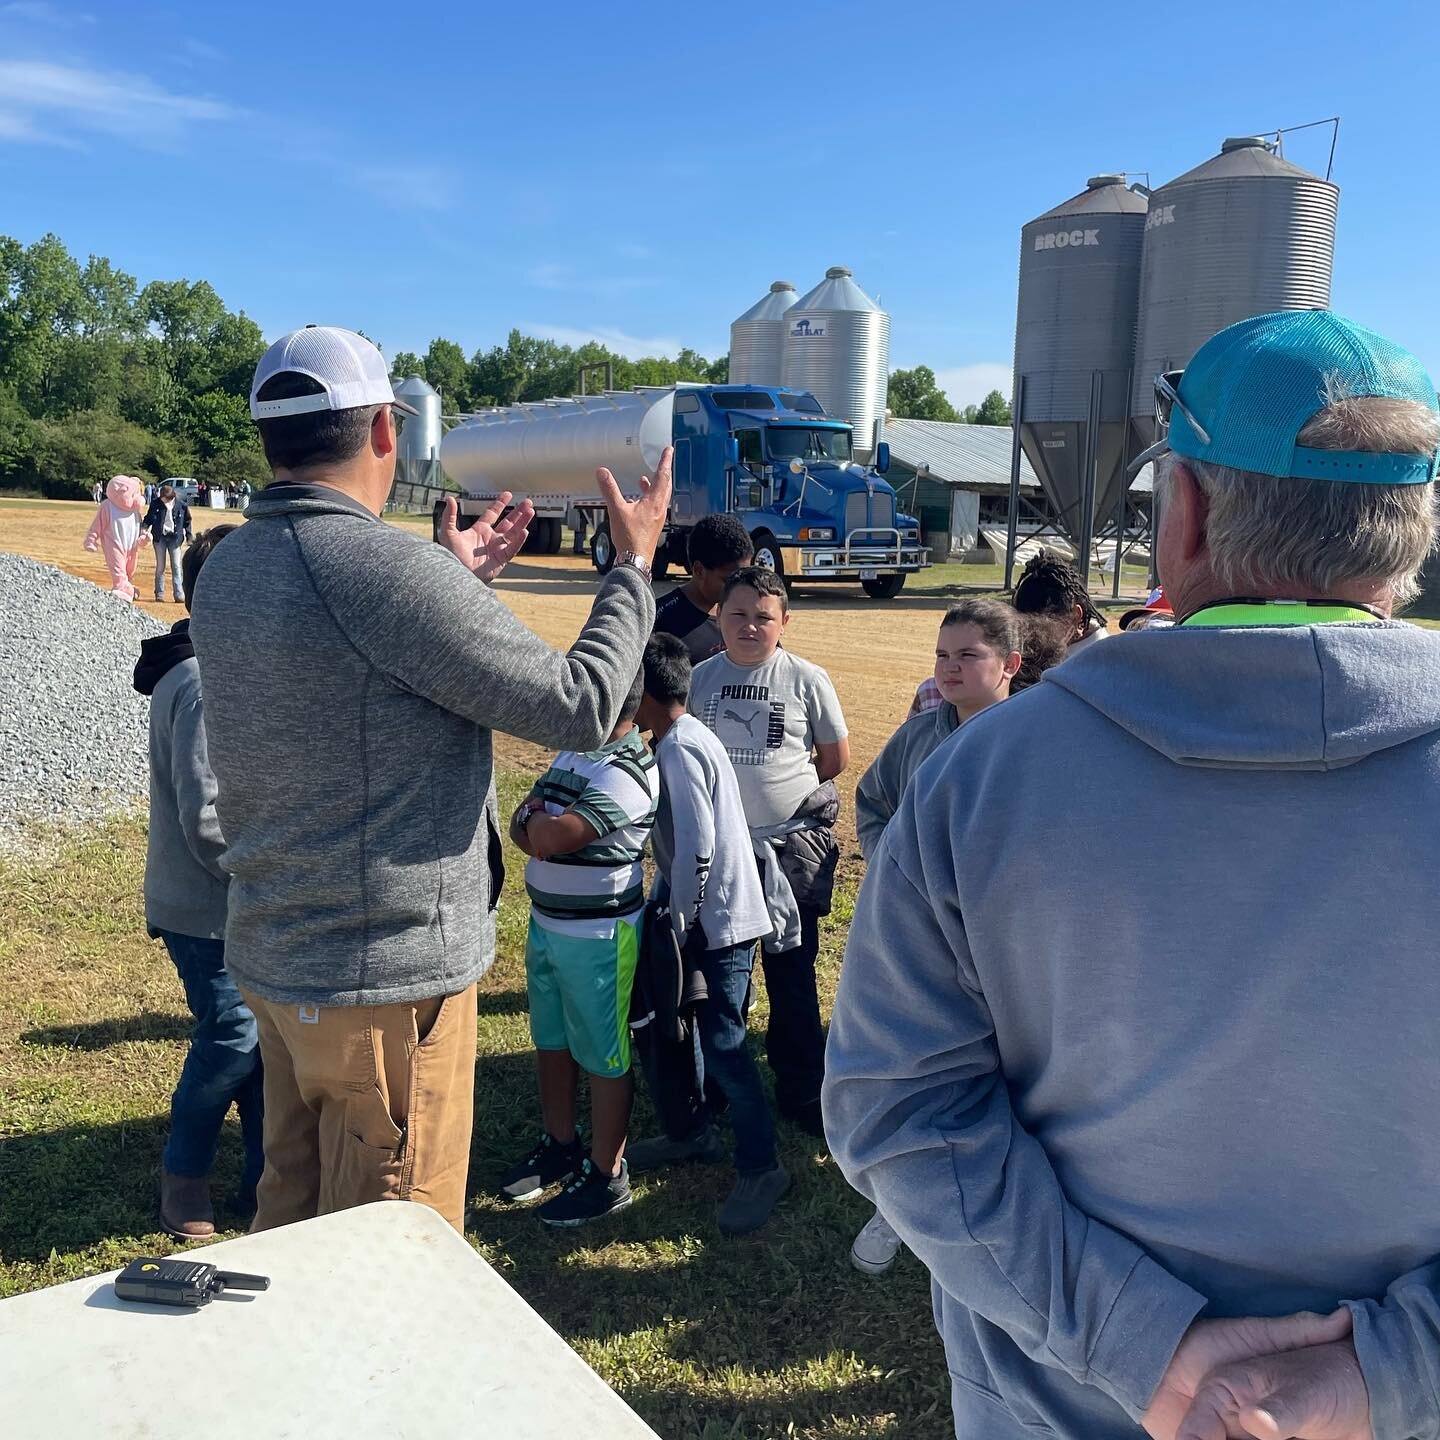 236 students from local elementary schools came out to James Butler Hog Farm and @hubbsfarmnc to learn all about pigs and pork. They met real pig farmers, feed truck driver, farm service person, nutritionist, veterinarian, extension agents, and an en